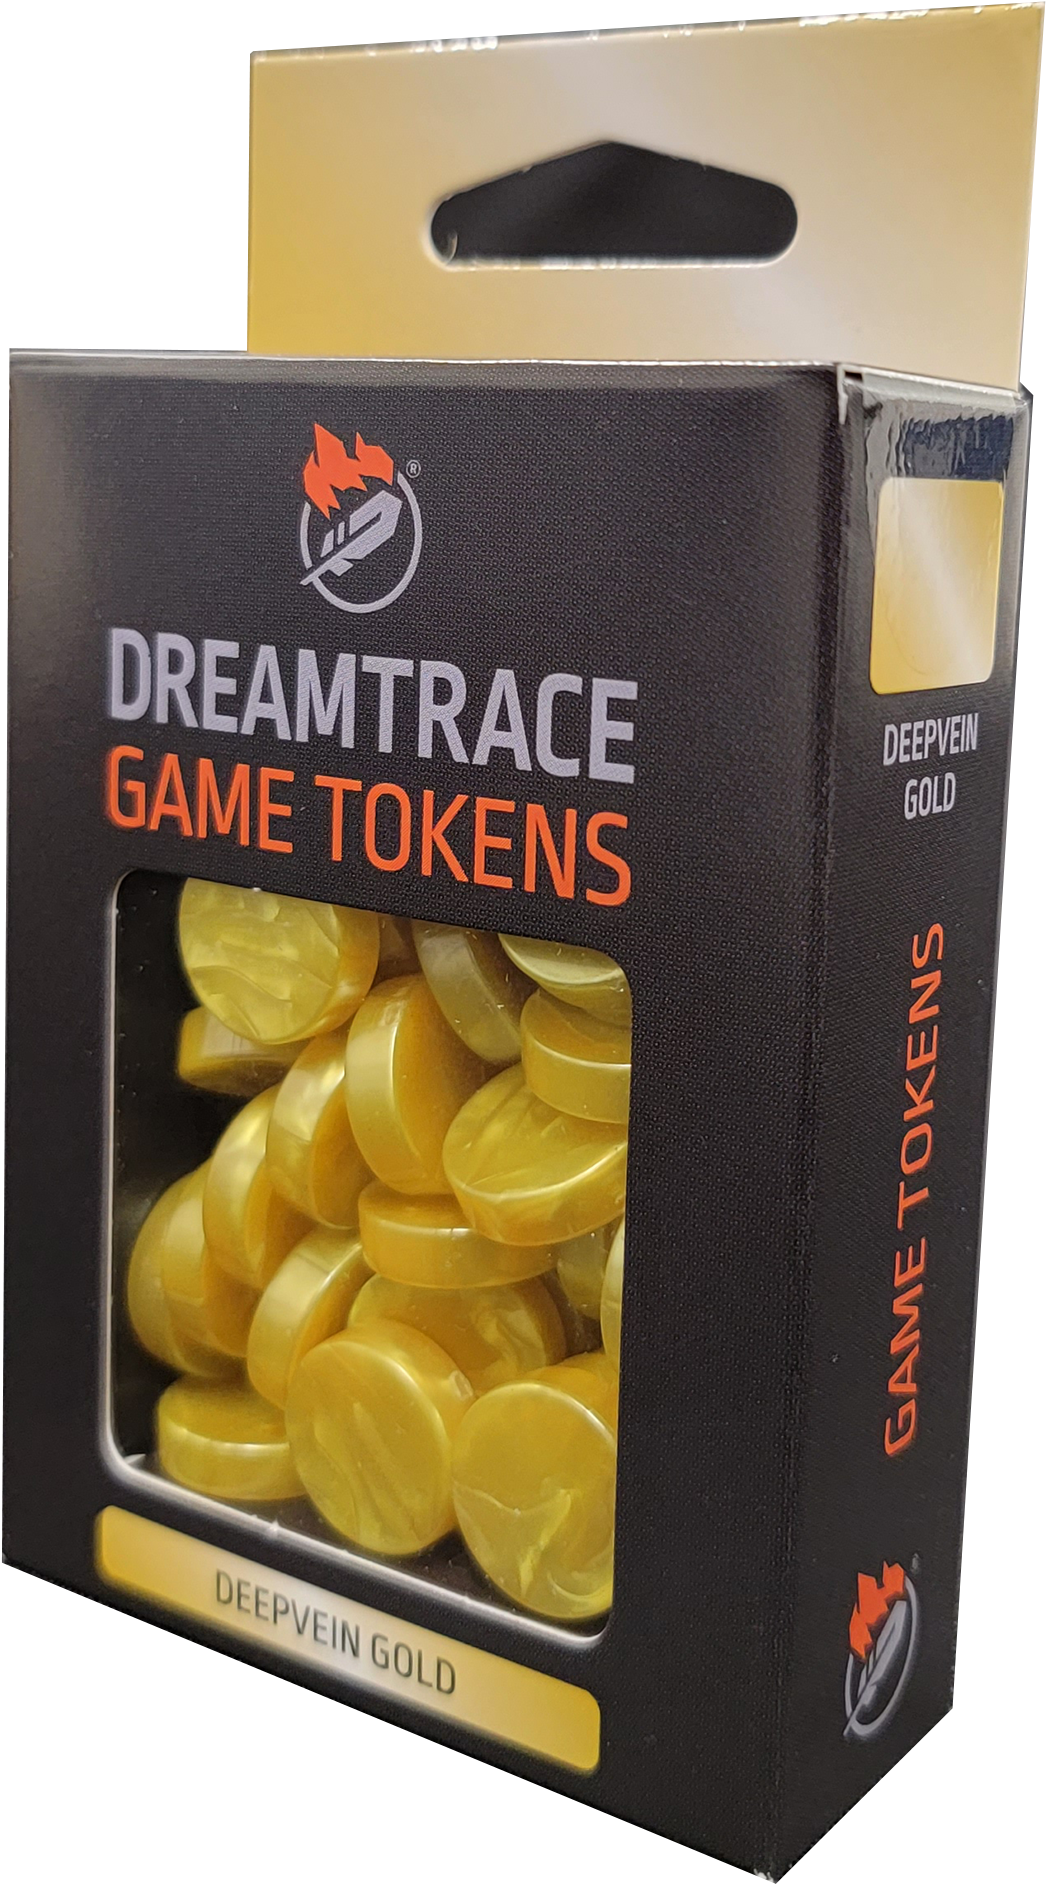 Dreamtrace Gaming Tokens: Deepvein Gold 